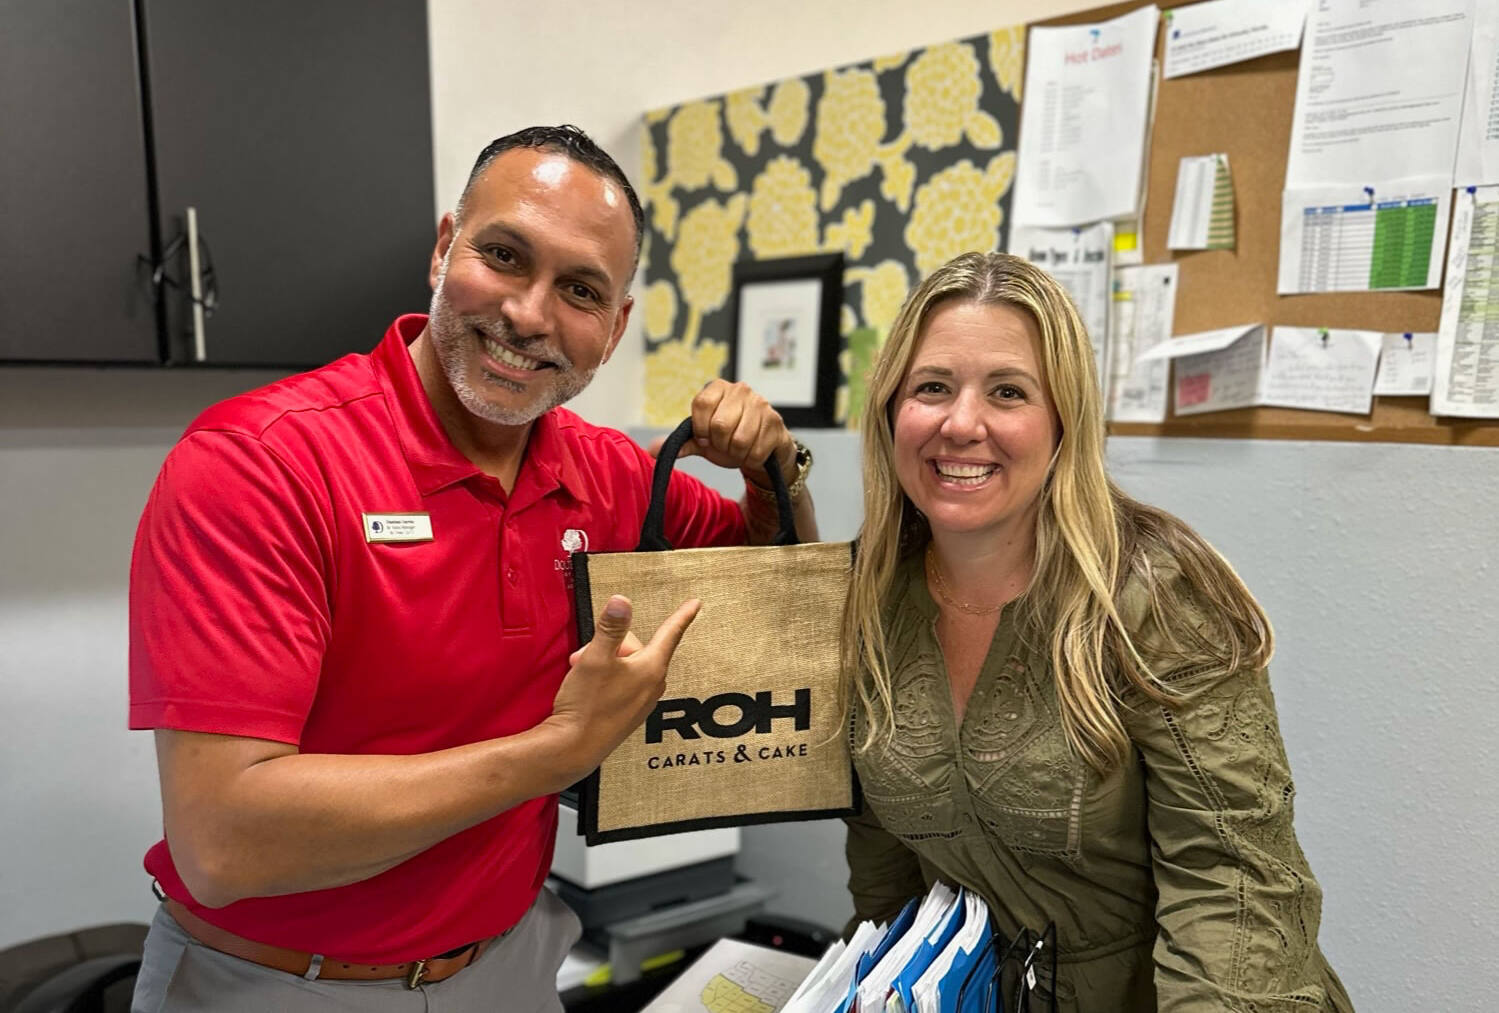 ROH Hotel Management Software Onboarding: Doubletree Orlando at SeaWorld Hotel - Image of ROH team member Kasey Denton smiling with a DoubleTree team member and a ROH welcome bag.